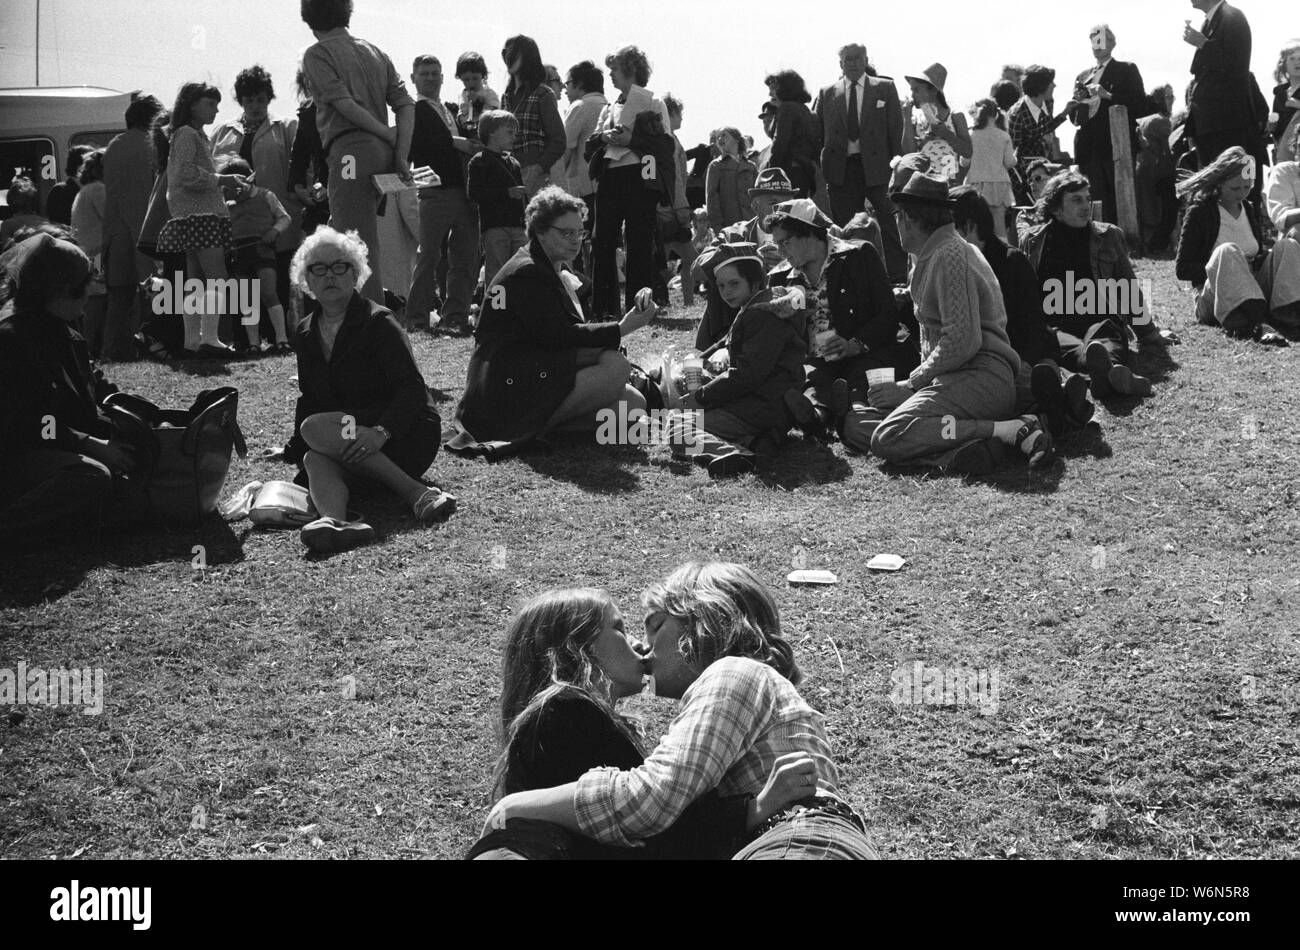 Young couple share a kiss, embrace each other at the annual Durham Miners Gala. 1970s Durham, County Durham. England 1974  UK HOMER SYKES Stock Photo